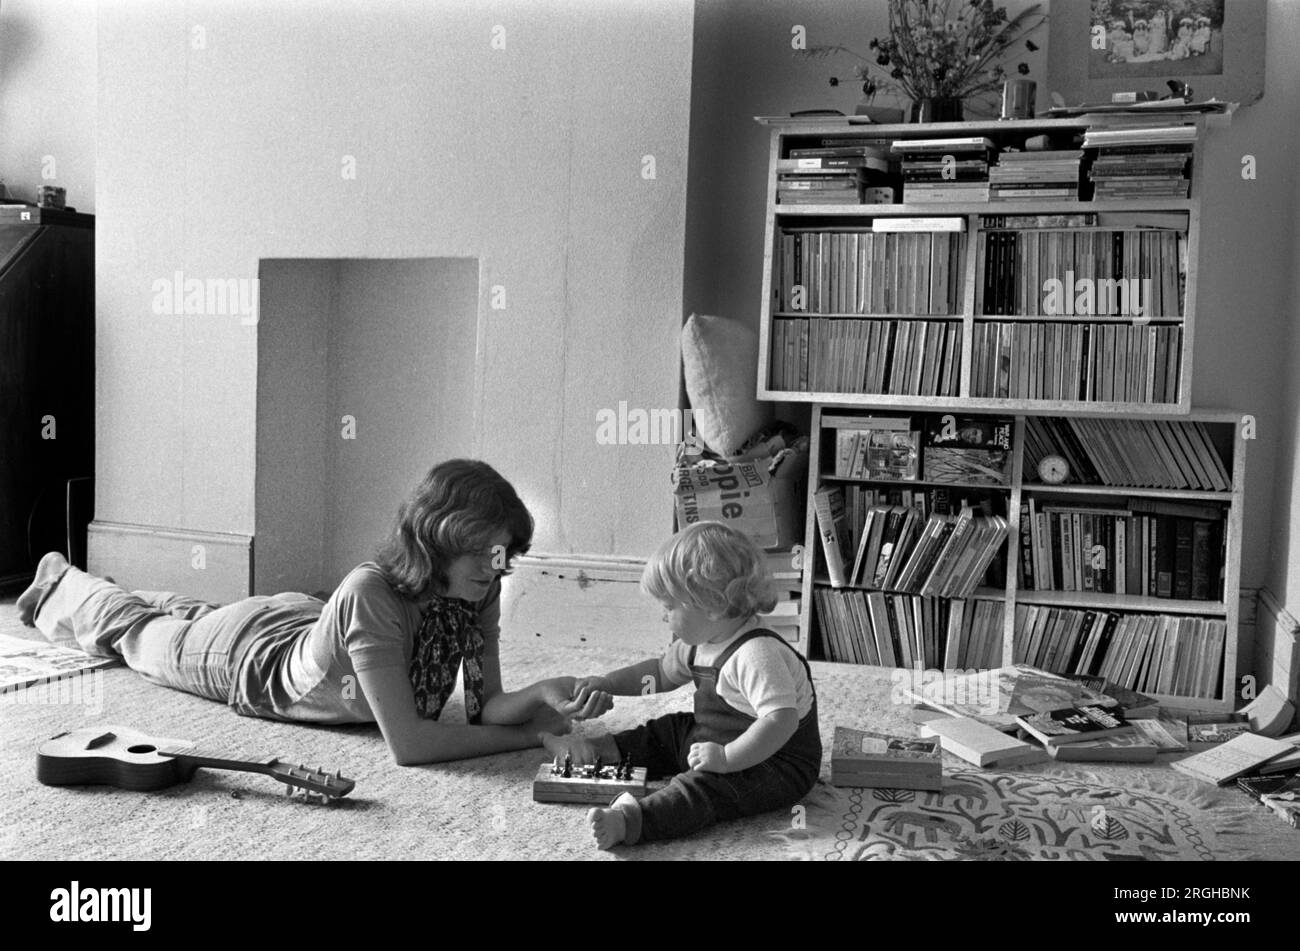 Family life interior home 1970s UK. Mother playing with baby son sitting on the floor learning. Concentrating. Mum spending quality time together with first child. Interior of living room middle class family life 1970s 1975 Southfields, South London UK HOMER SYKES Stock Photo